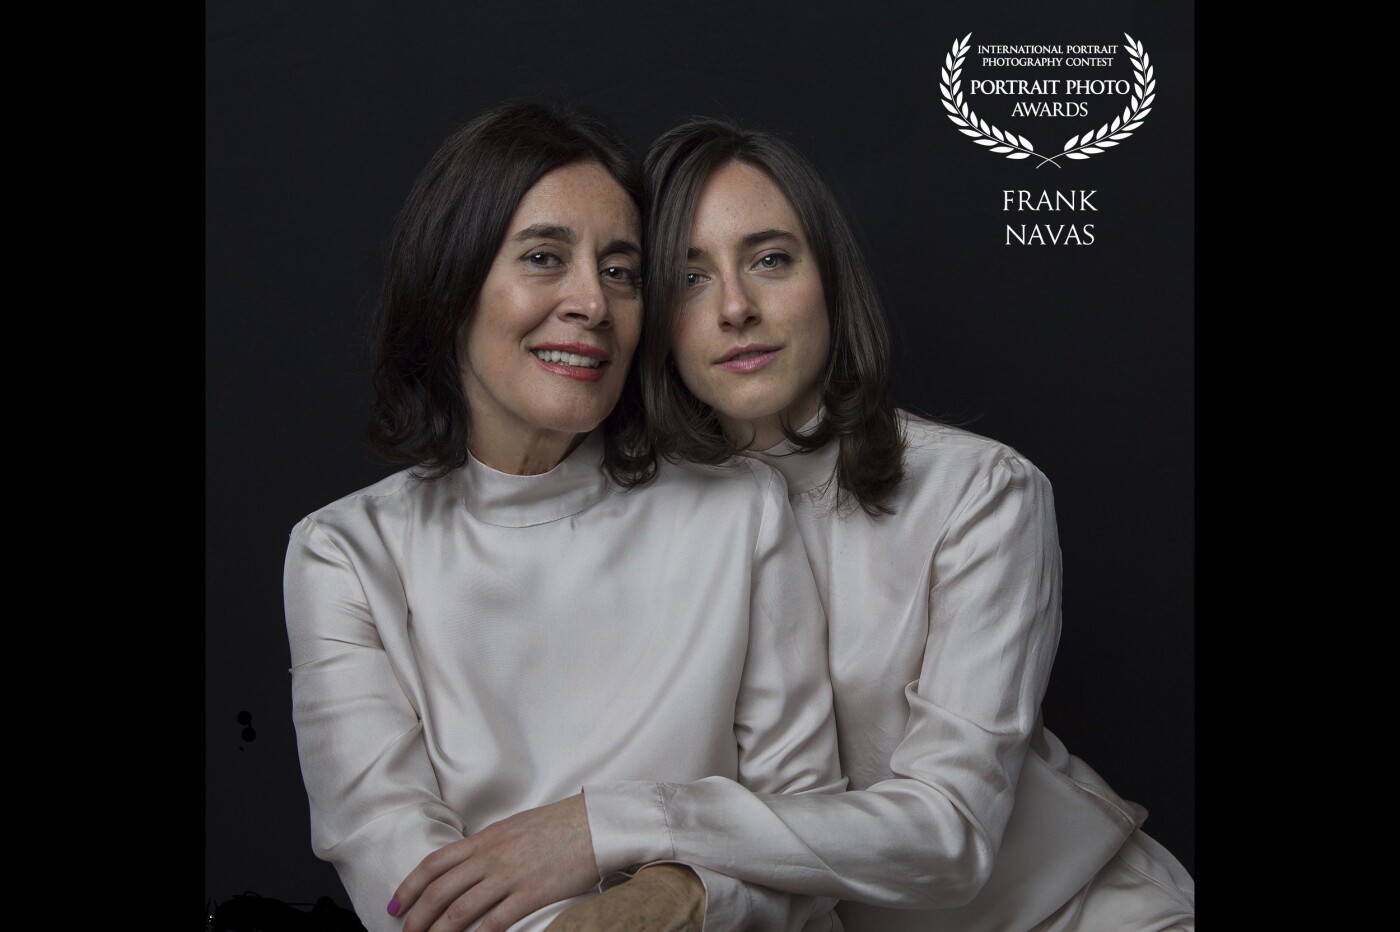 This portrait of mother and daughter was taken the day before Mother's Day at the request of mom. They have a very close relationship and much love for one another, which comes through in the photo.